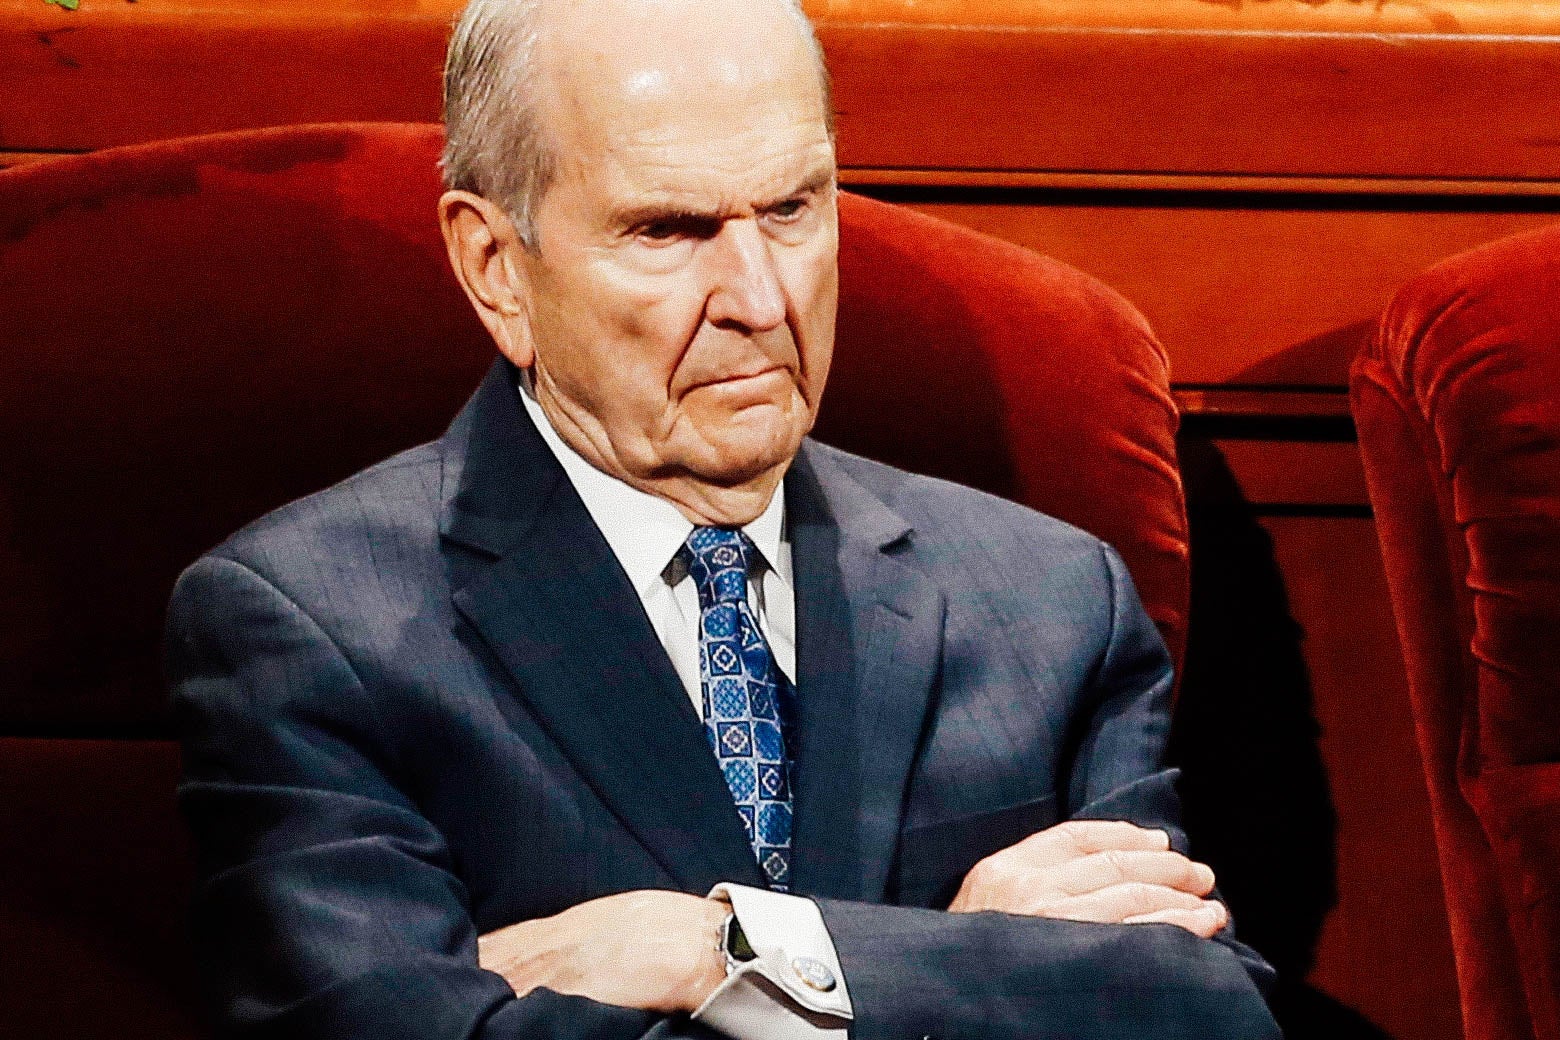 Russell Nelson seated, with his arms crossed.